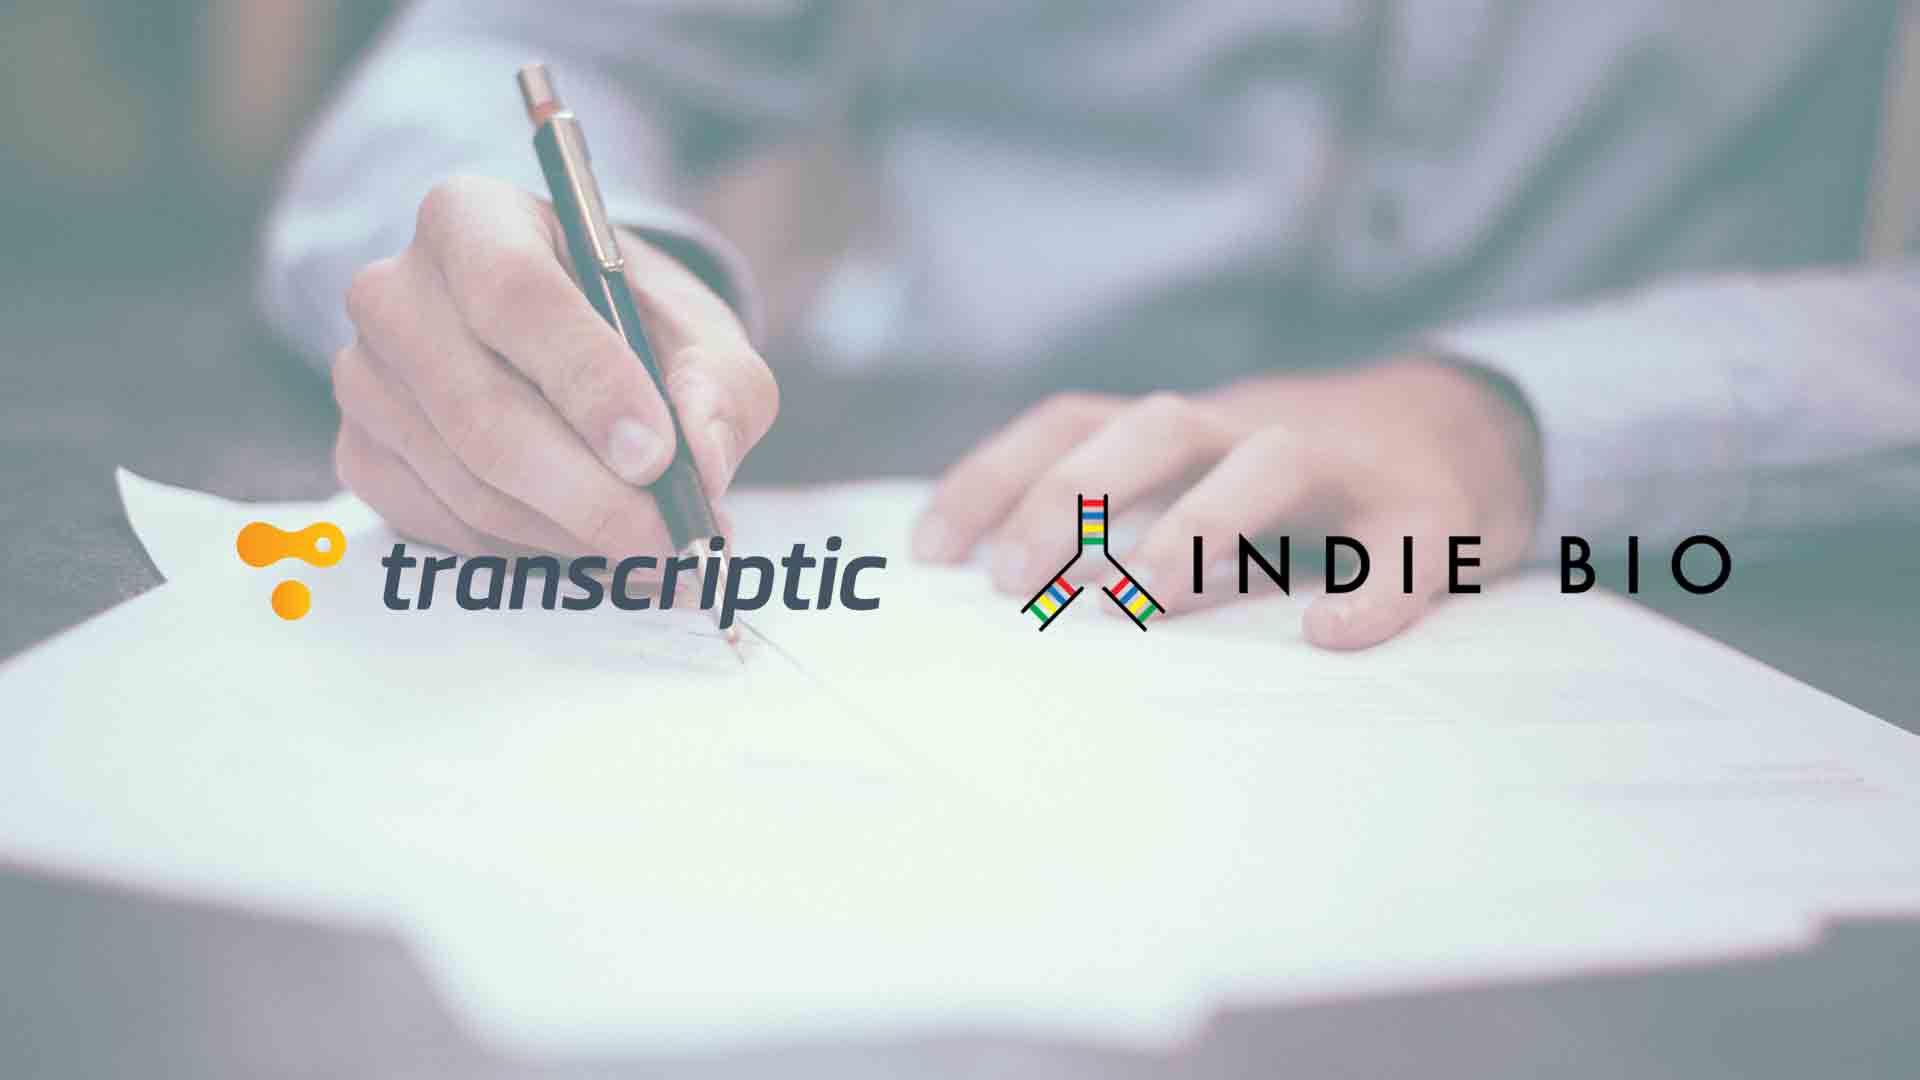 IndieBio secures partnership with Transcriptic to Accelerate Biology